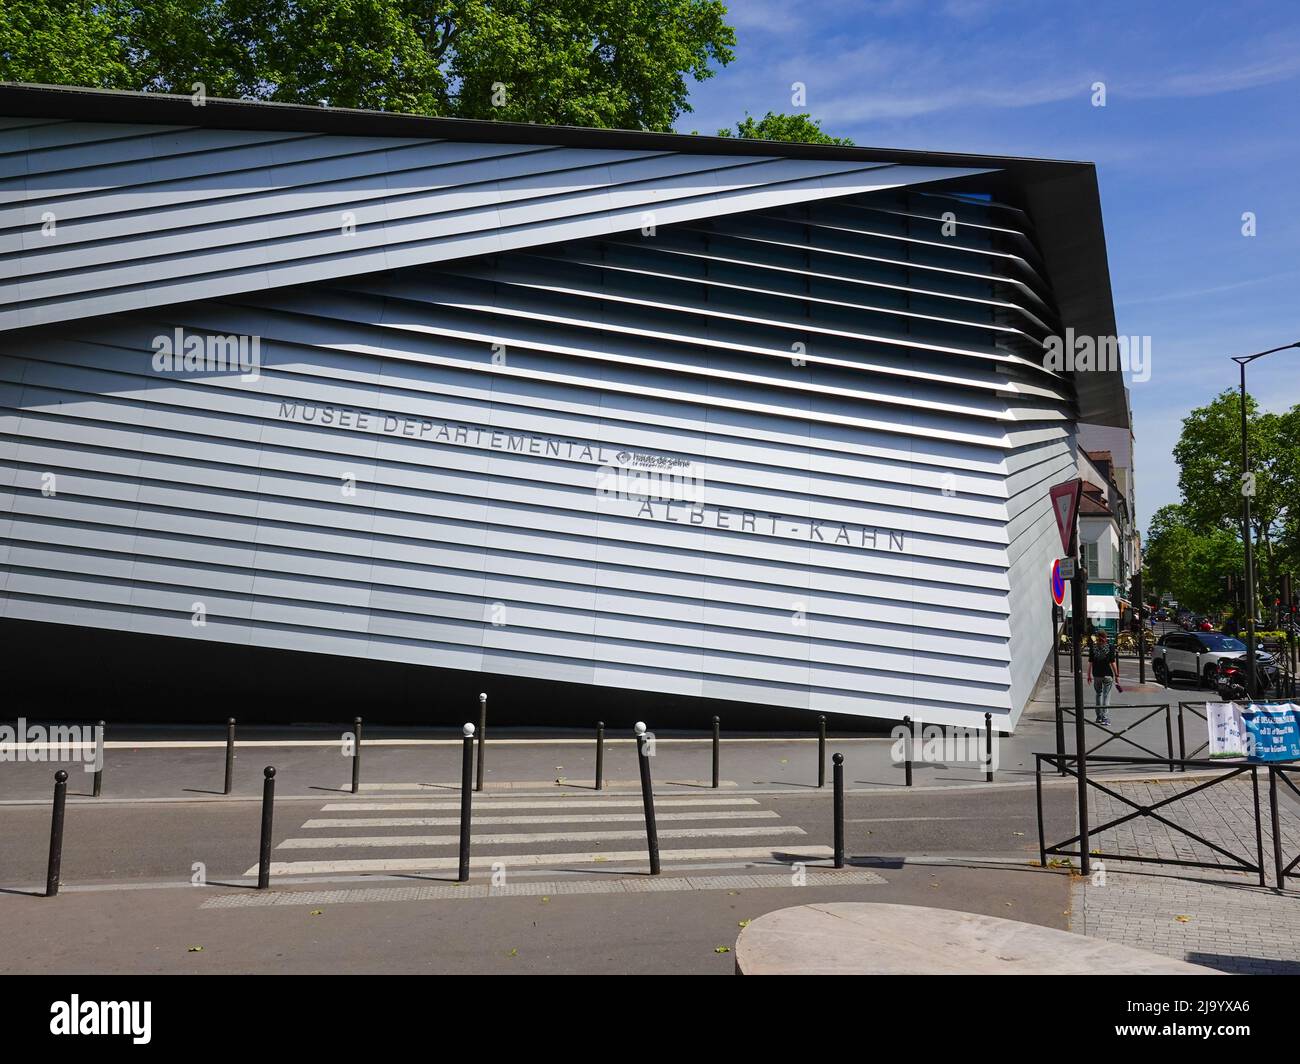 Albert-Kahn Museum and Gardens, recently reopened after several years of renovation and expansion. Paris, France. Stock Photo